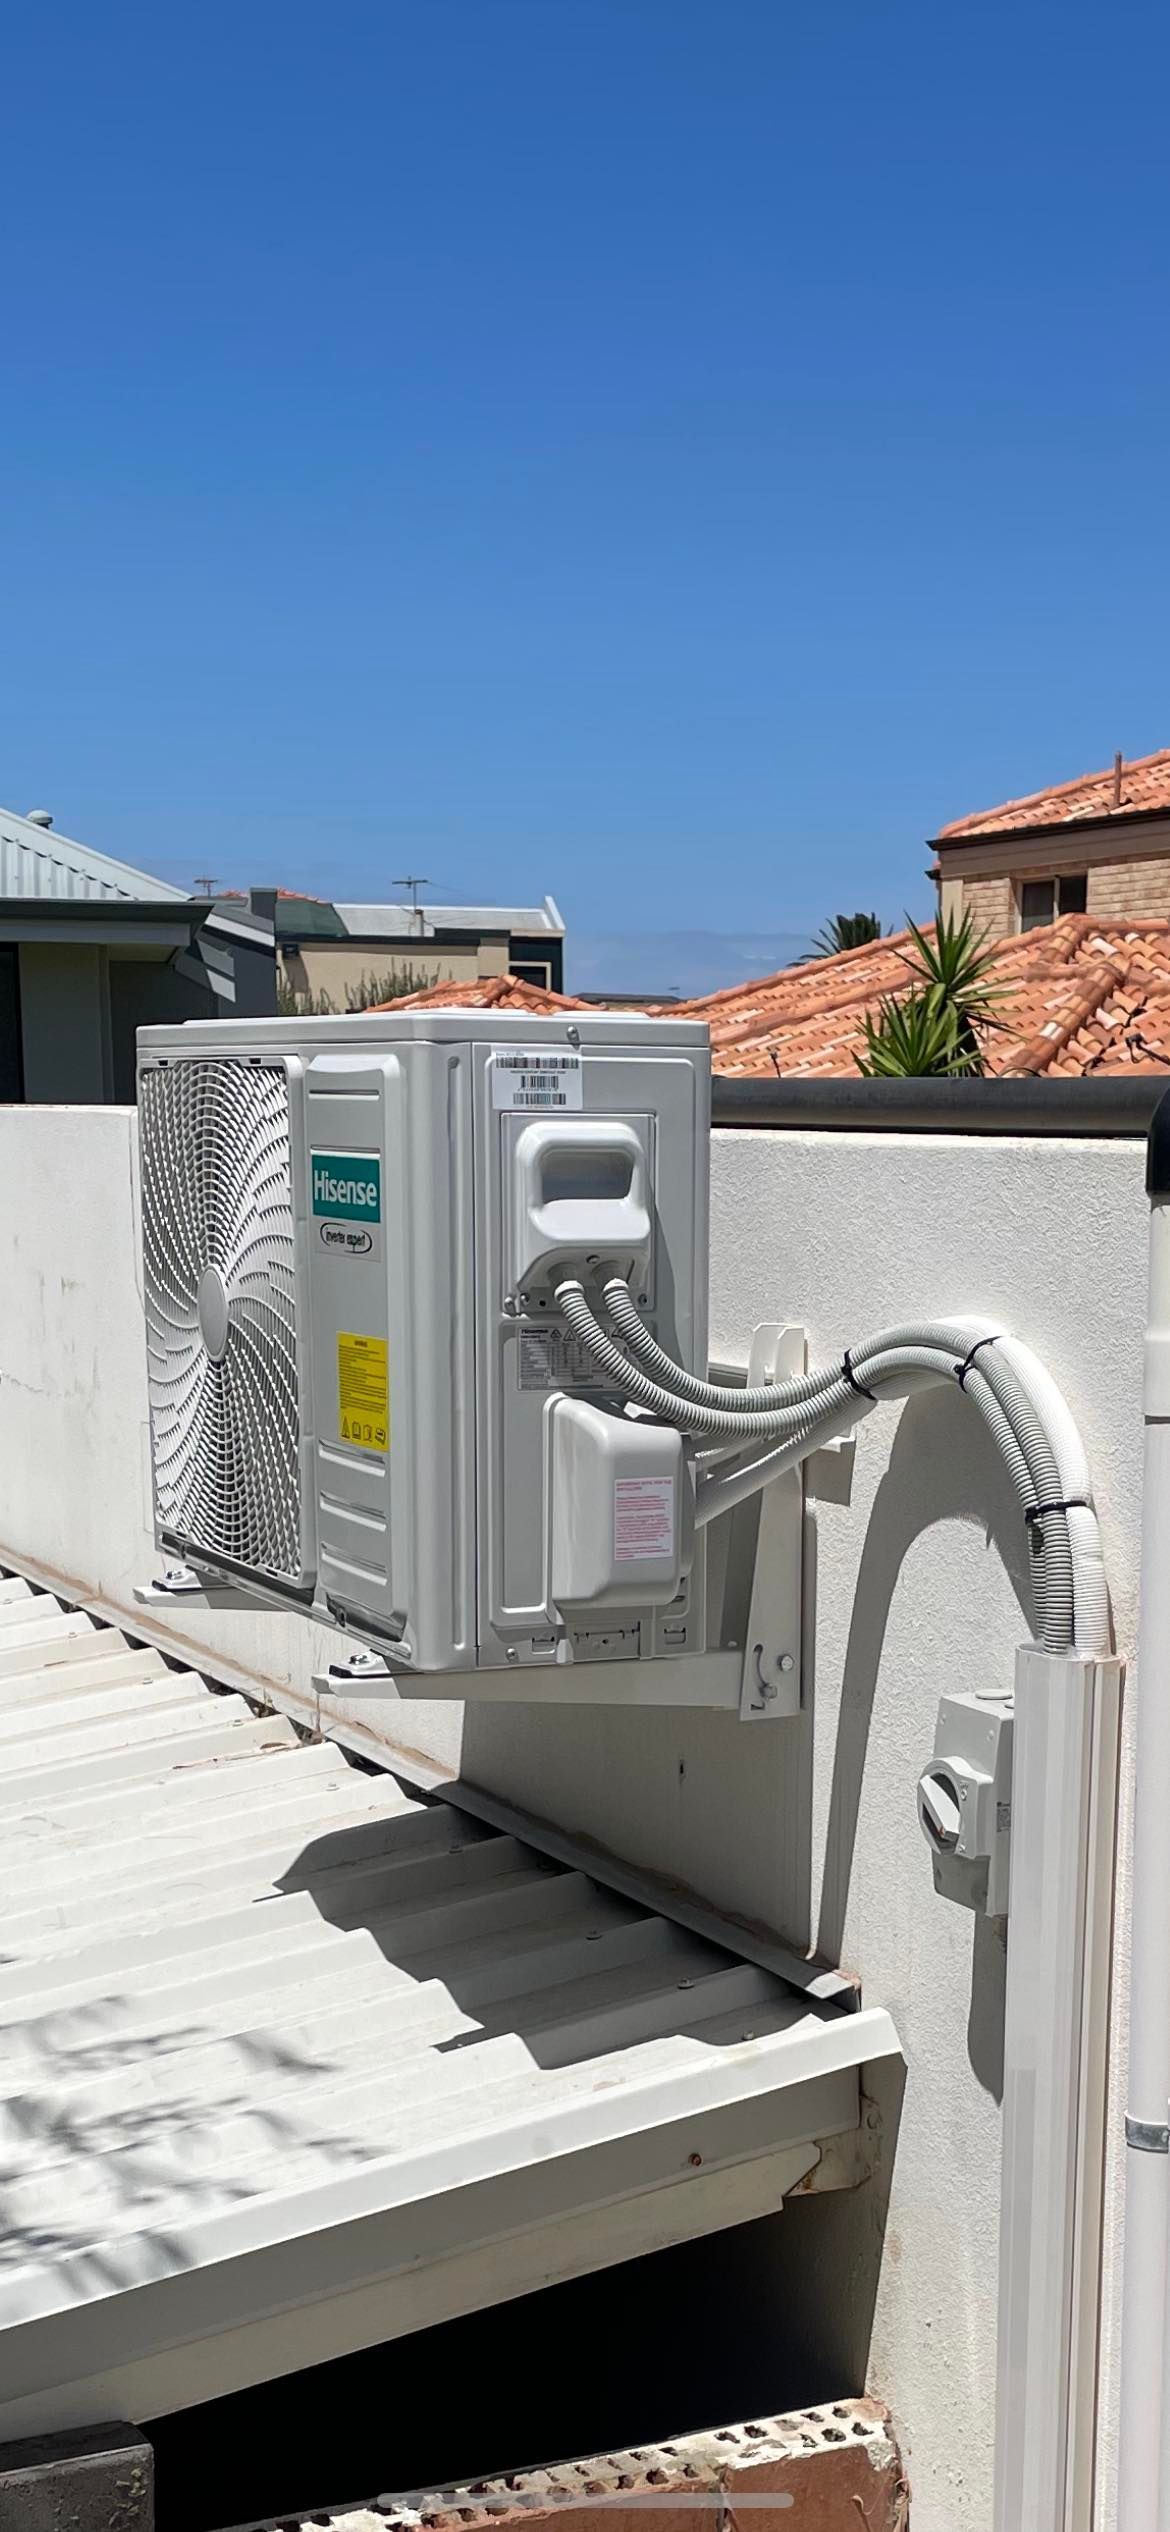 Outdoor unit of a Split System Air Conditioner Installed onto External Wall